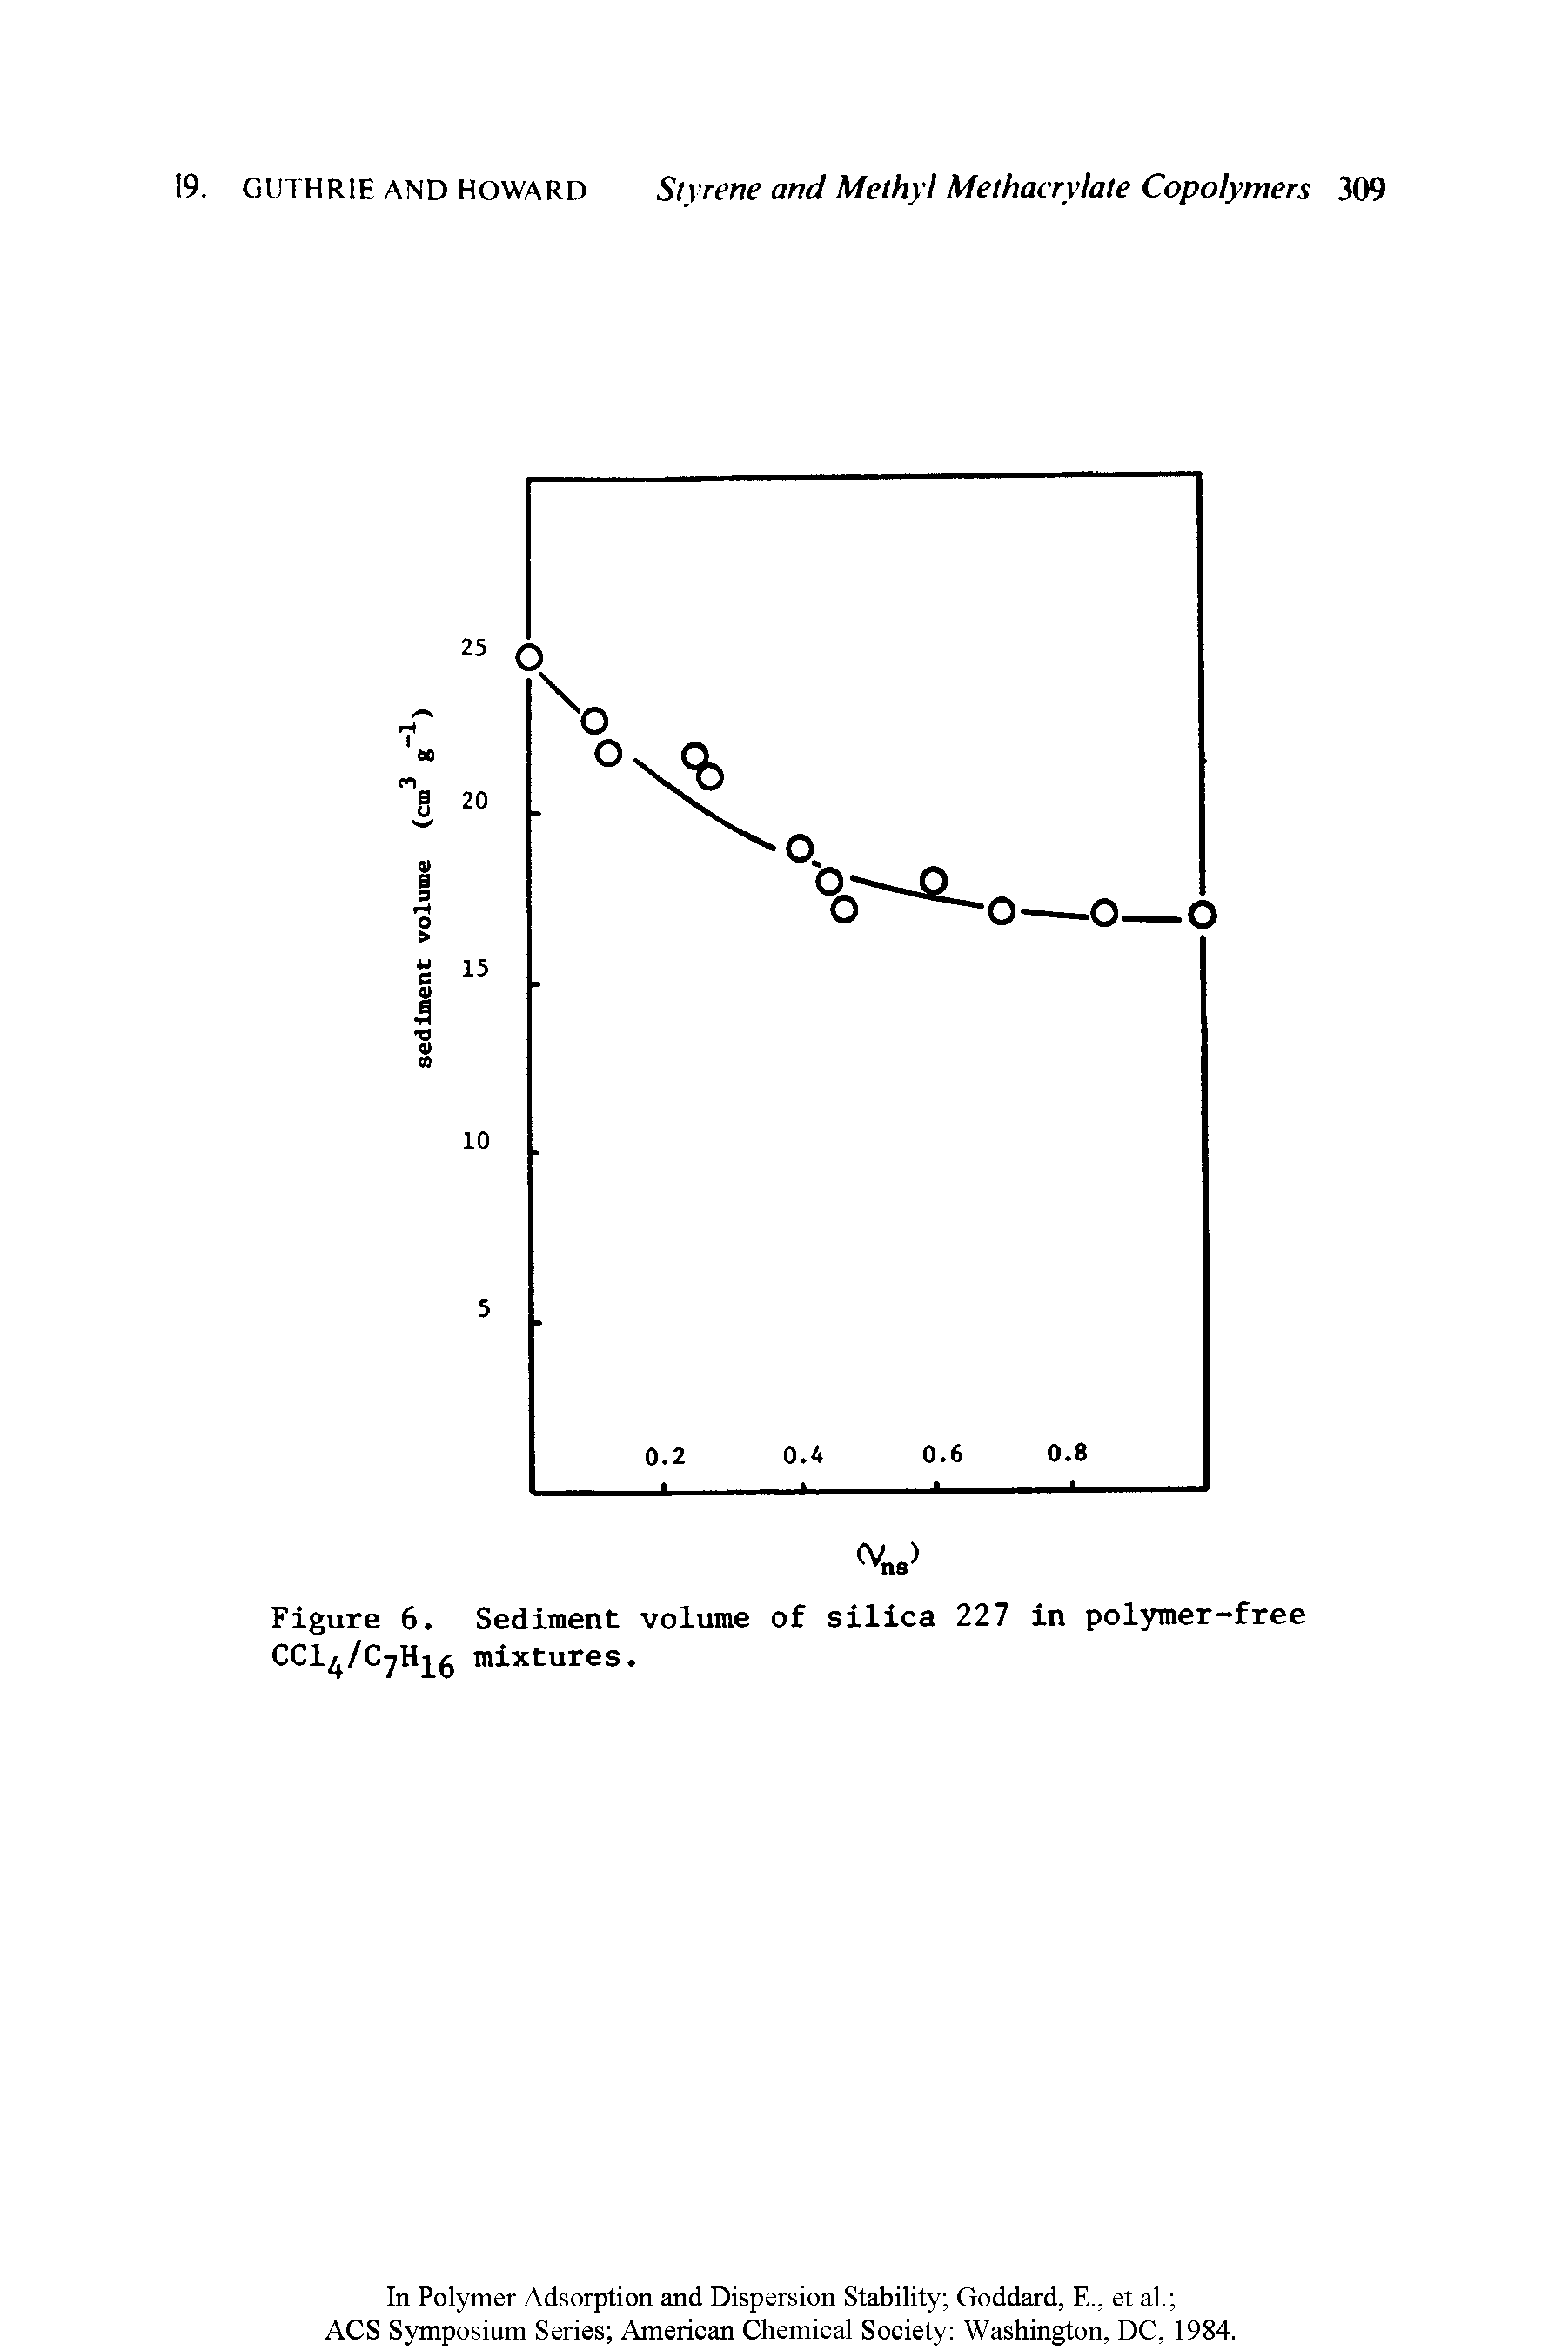 Figure 6. Sediment volume of silica 227 in polymer-free CCl /C Hj mixtures.